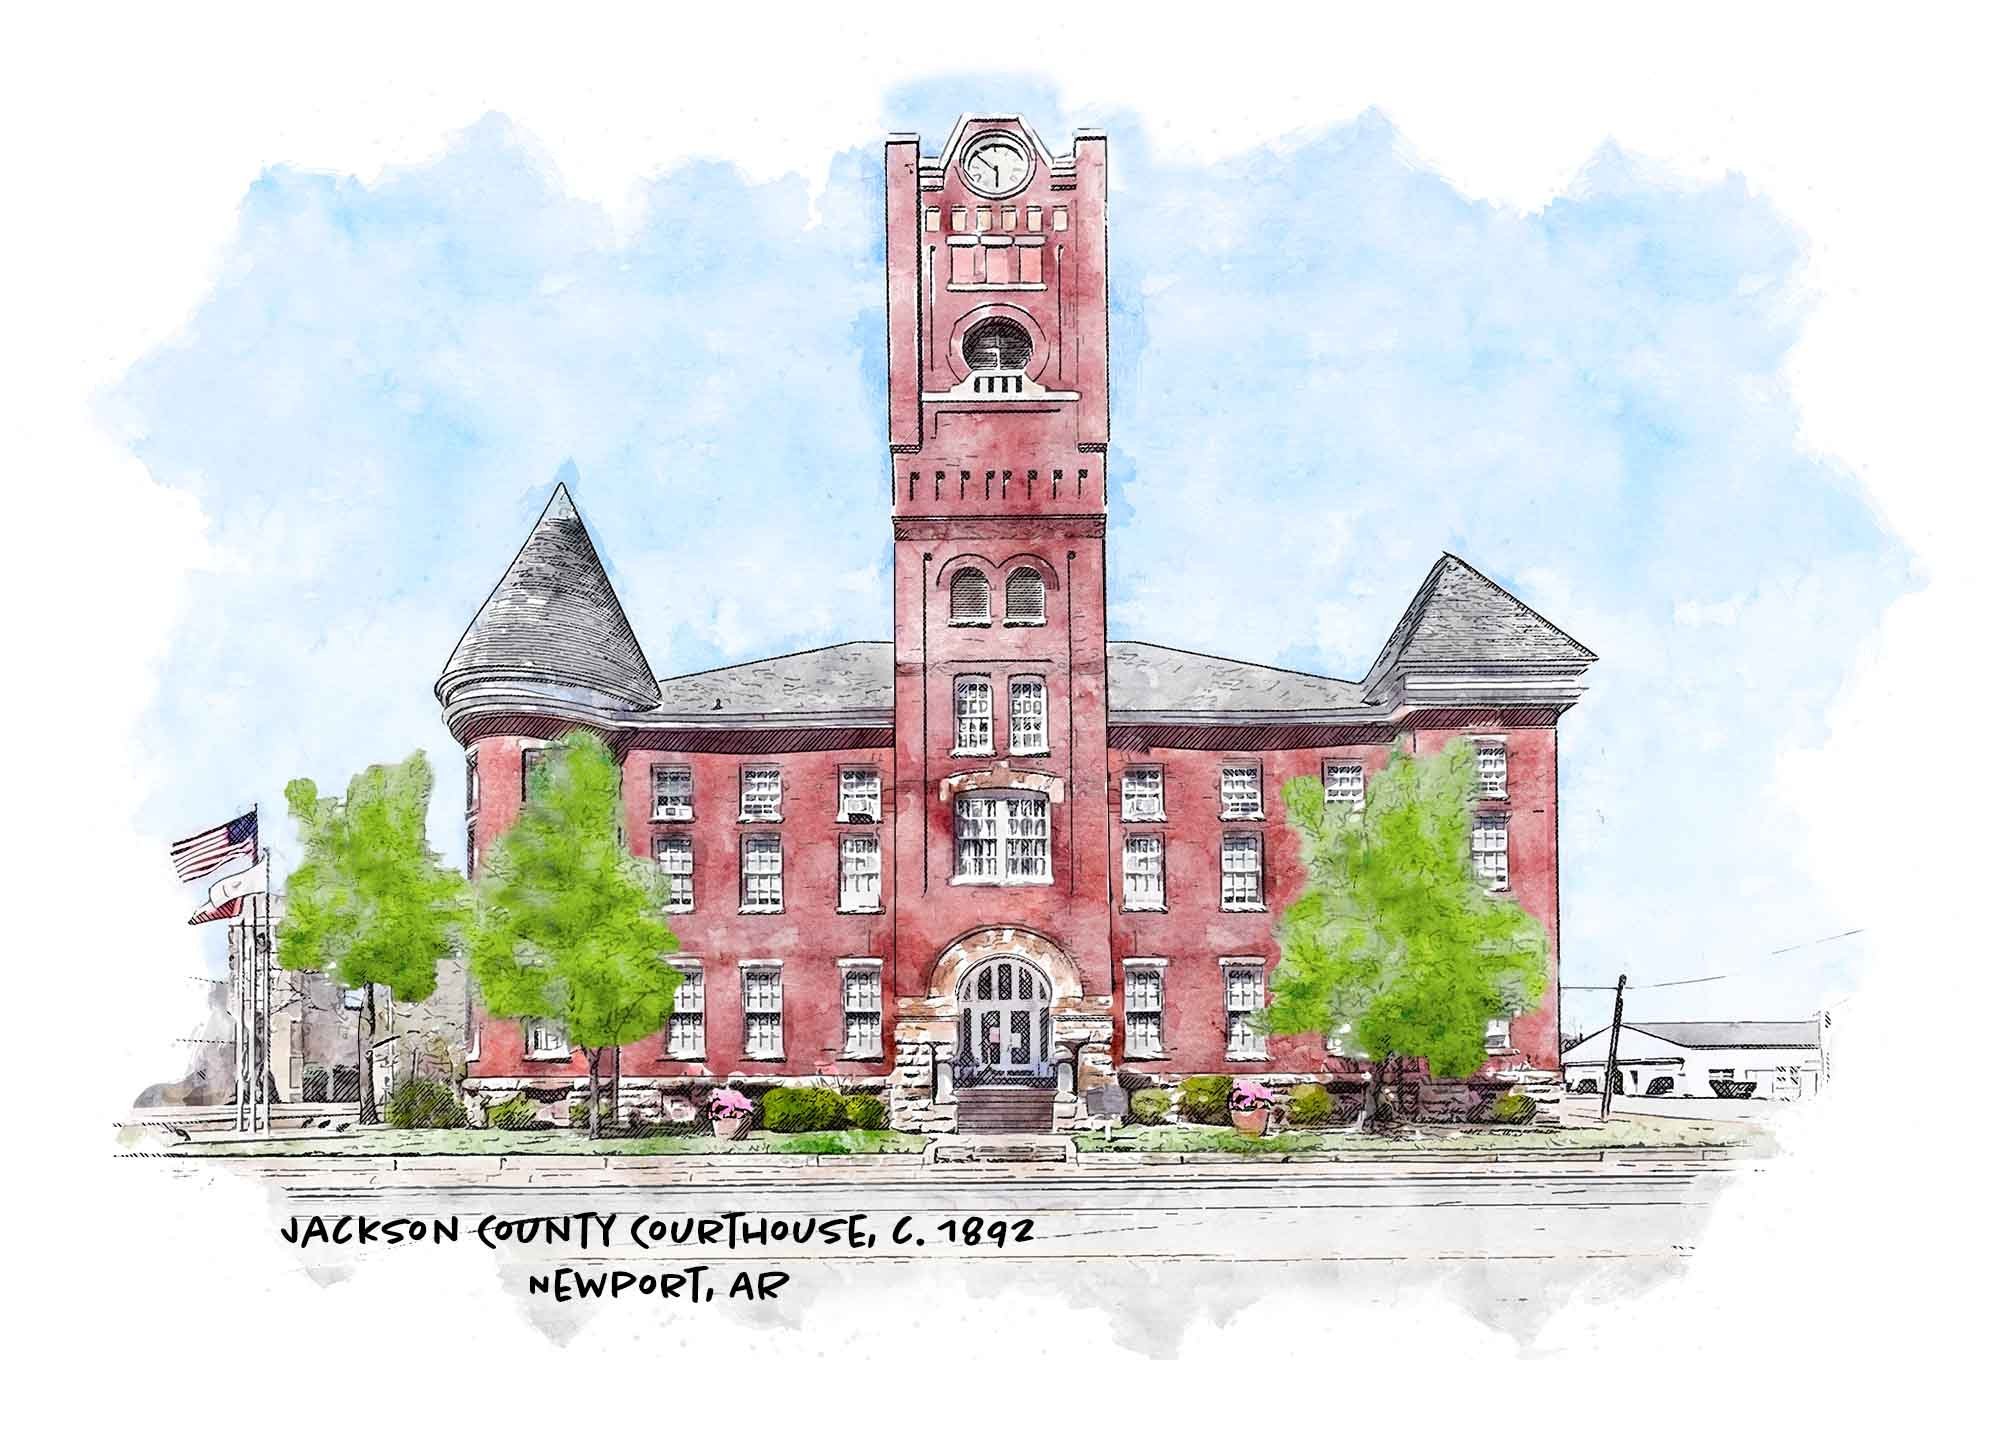 We have just added our 28th Arkansas county #courthouse to our #Arkansas #Heritage Collection: The Jackson County Courthouse. It sits at the corner of Third and Main Streets in #Newport, Arkansas. A stunning Richardsonian Romanesque structure, it was